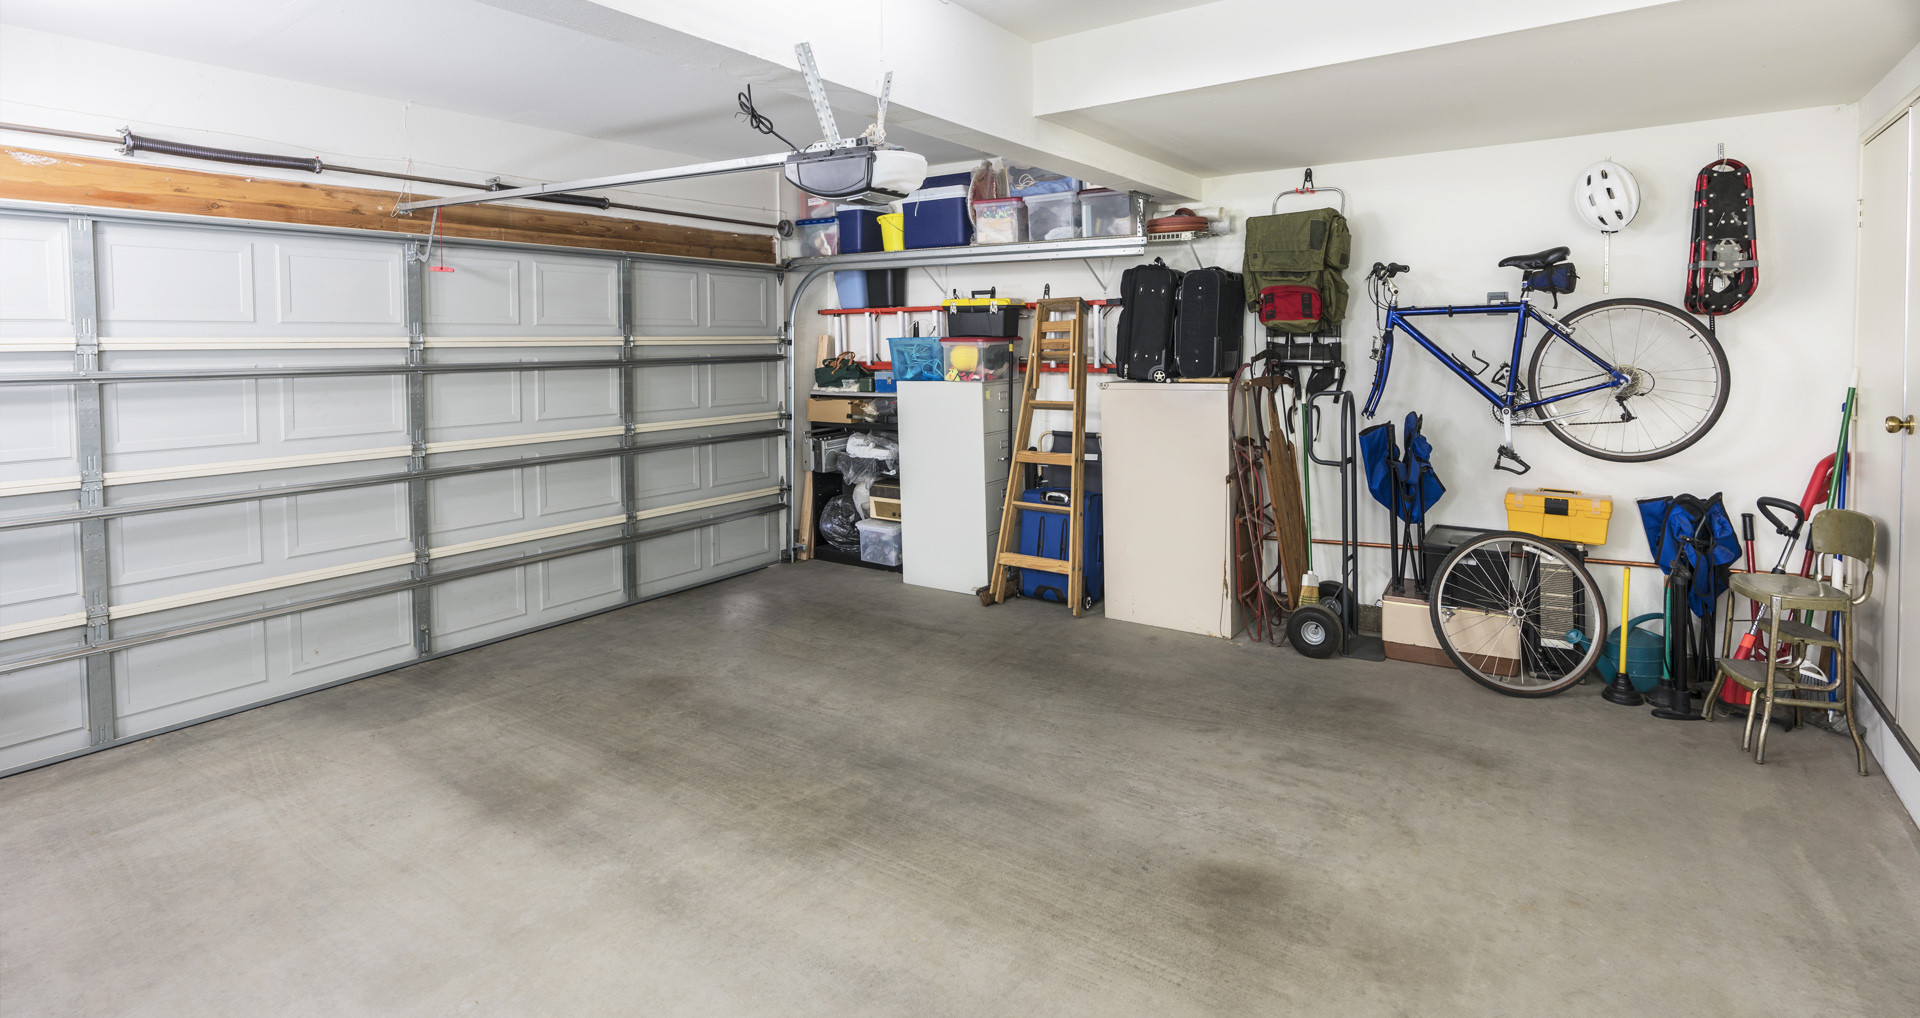 Organized Garage Images
 4 Steps to a More Organized Garage